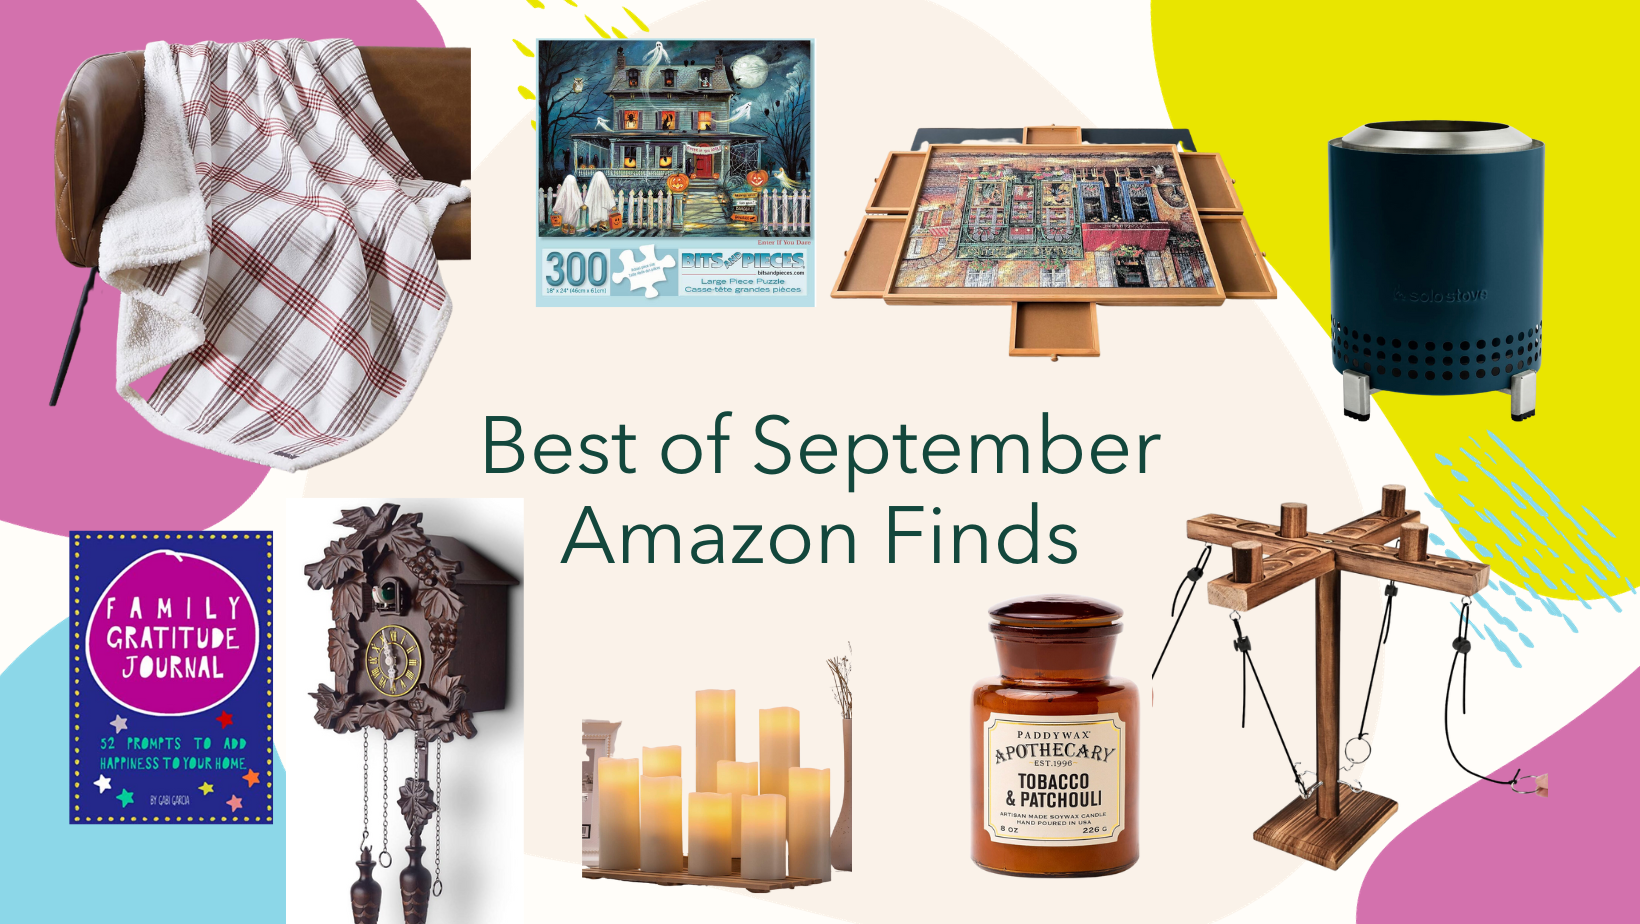 Best of September Amazon Finds